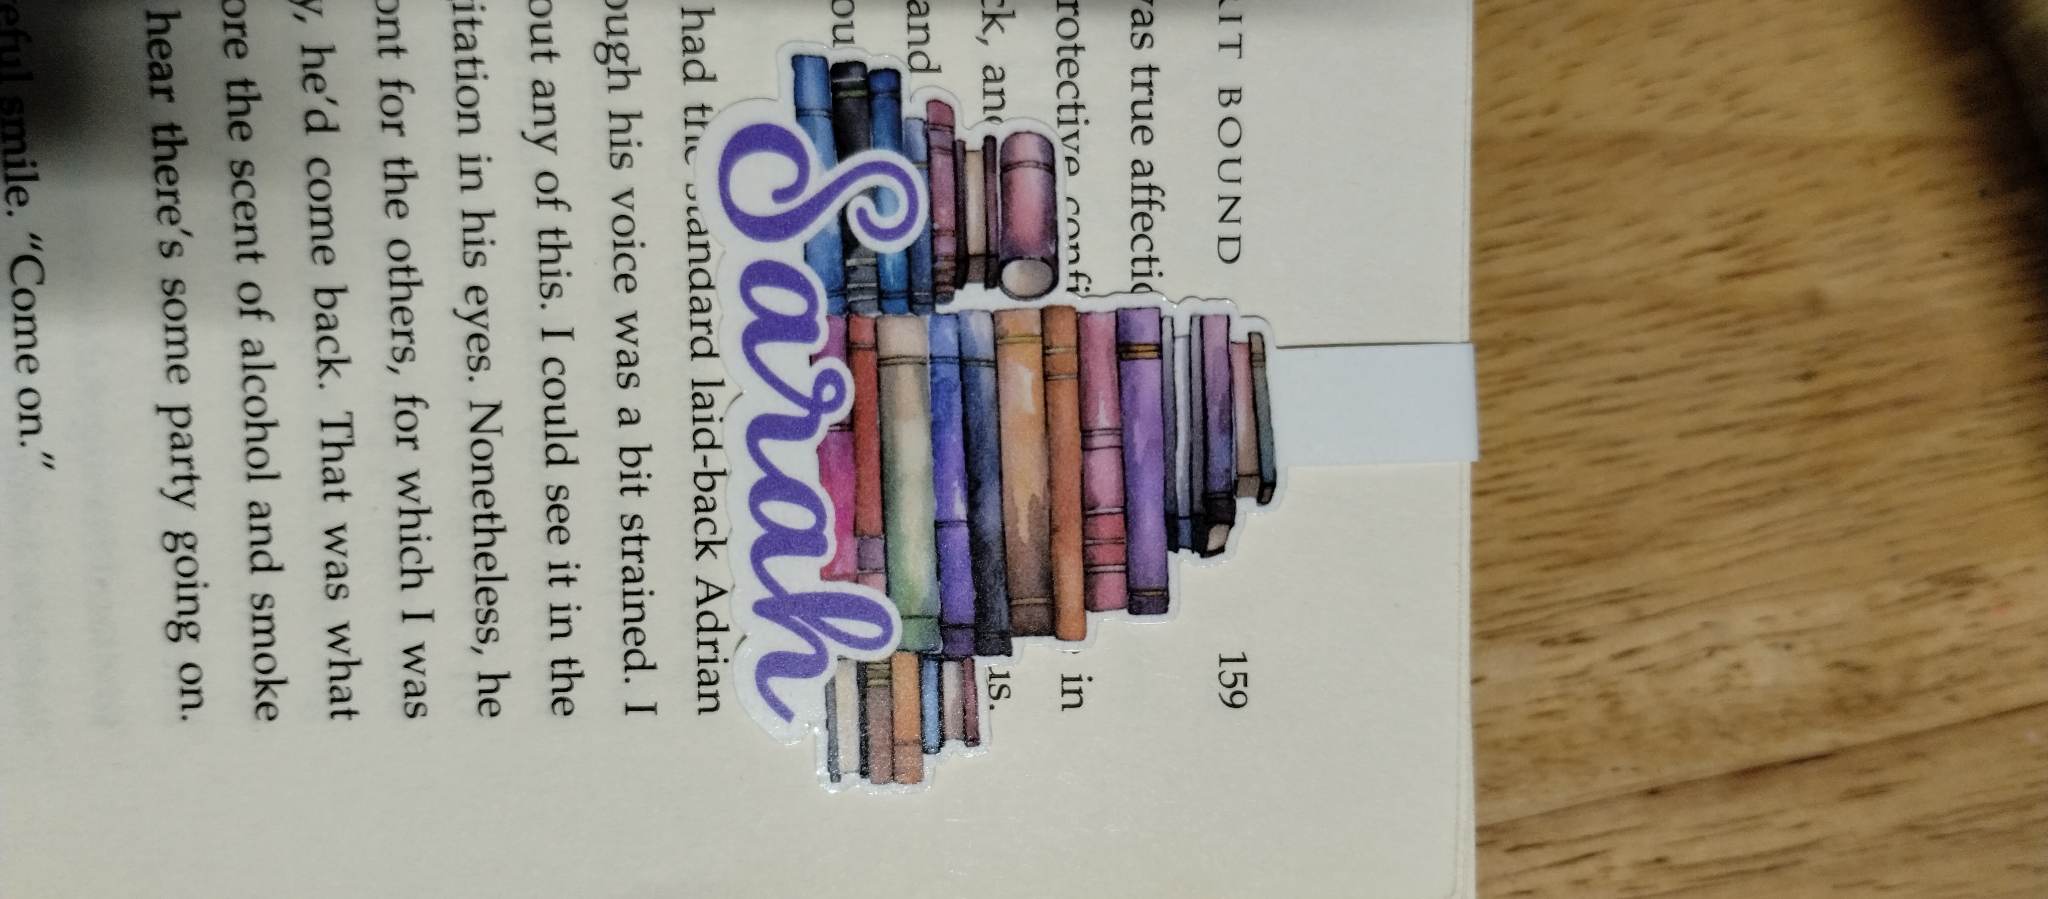 Personalized Watercolor Books Magnetic Bookmark - Add Your Name in Style,  Book Mark with Custom Name